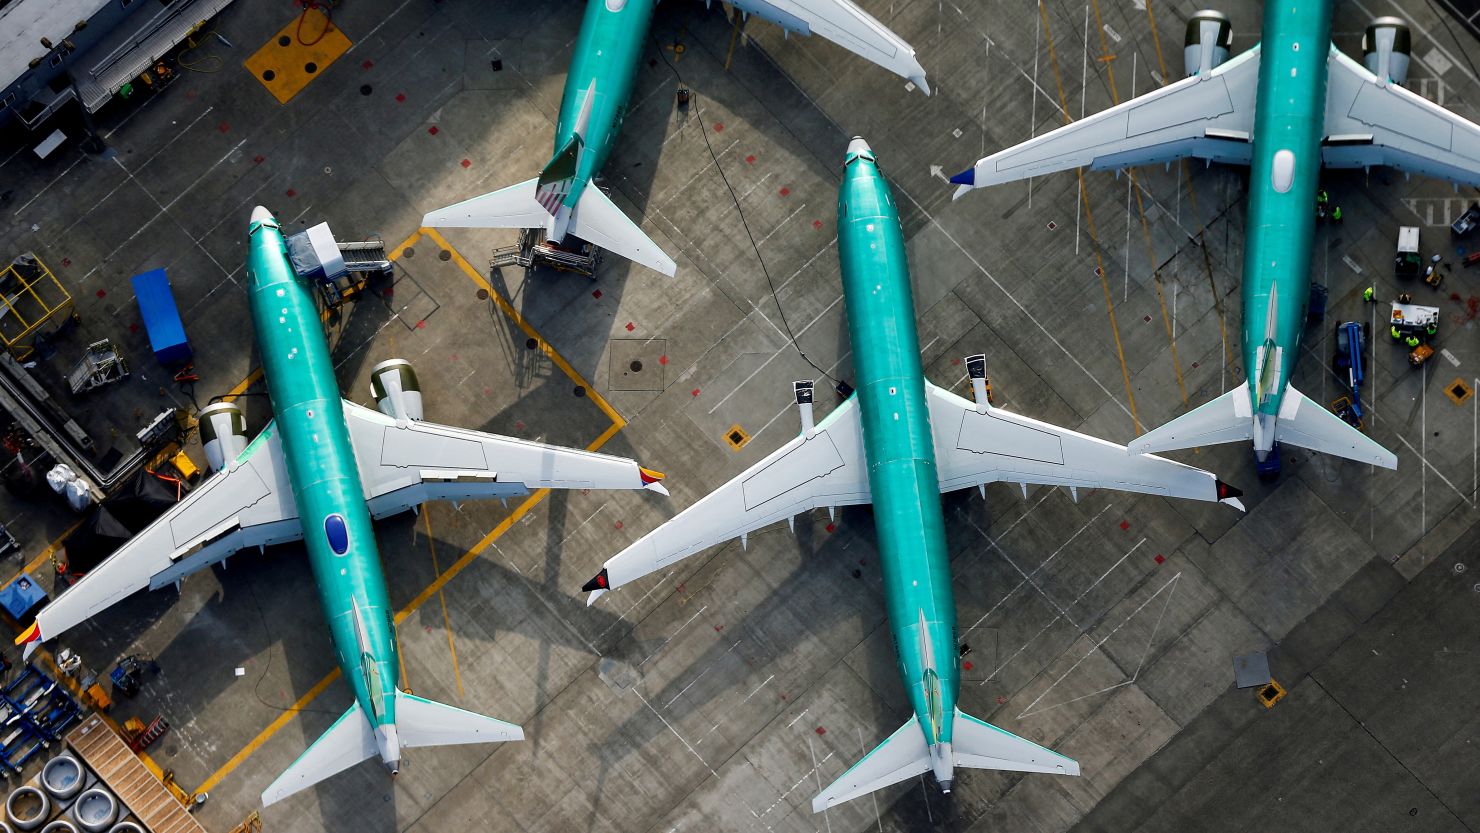 A 2019 aerial photo shows Boeing 737 MAX airplanes parked on the tarmac at the Boeing Factory in Renton, Washington.